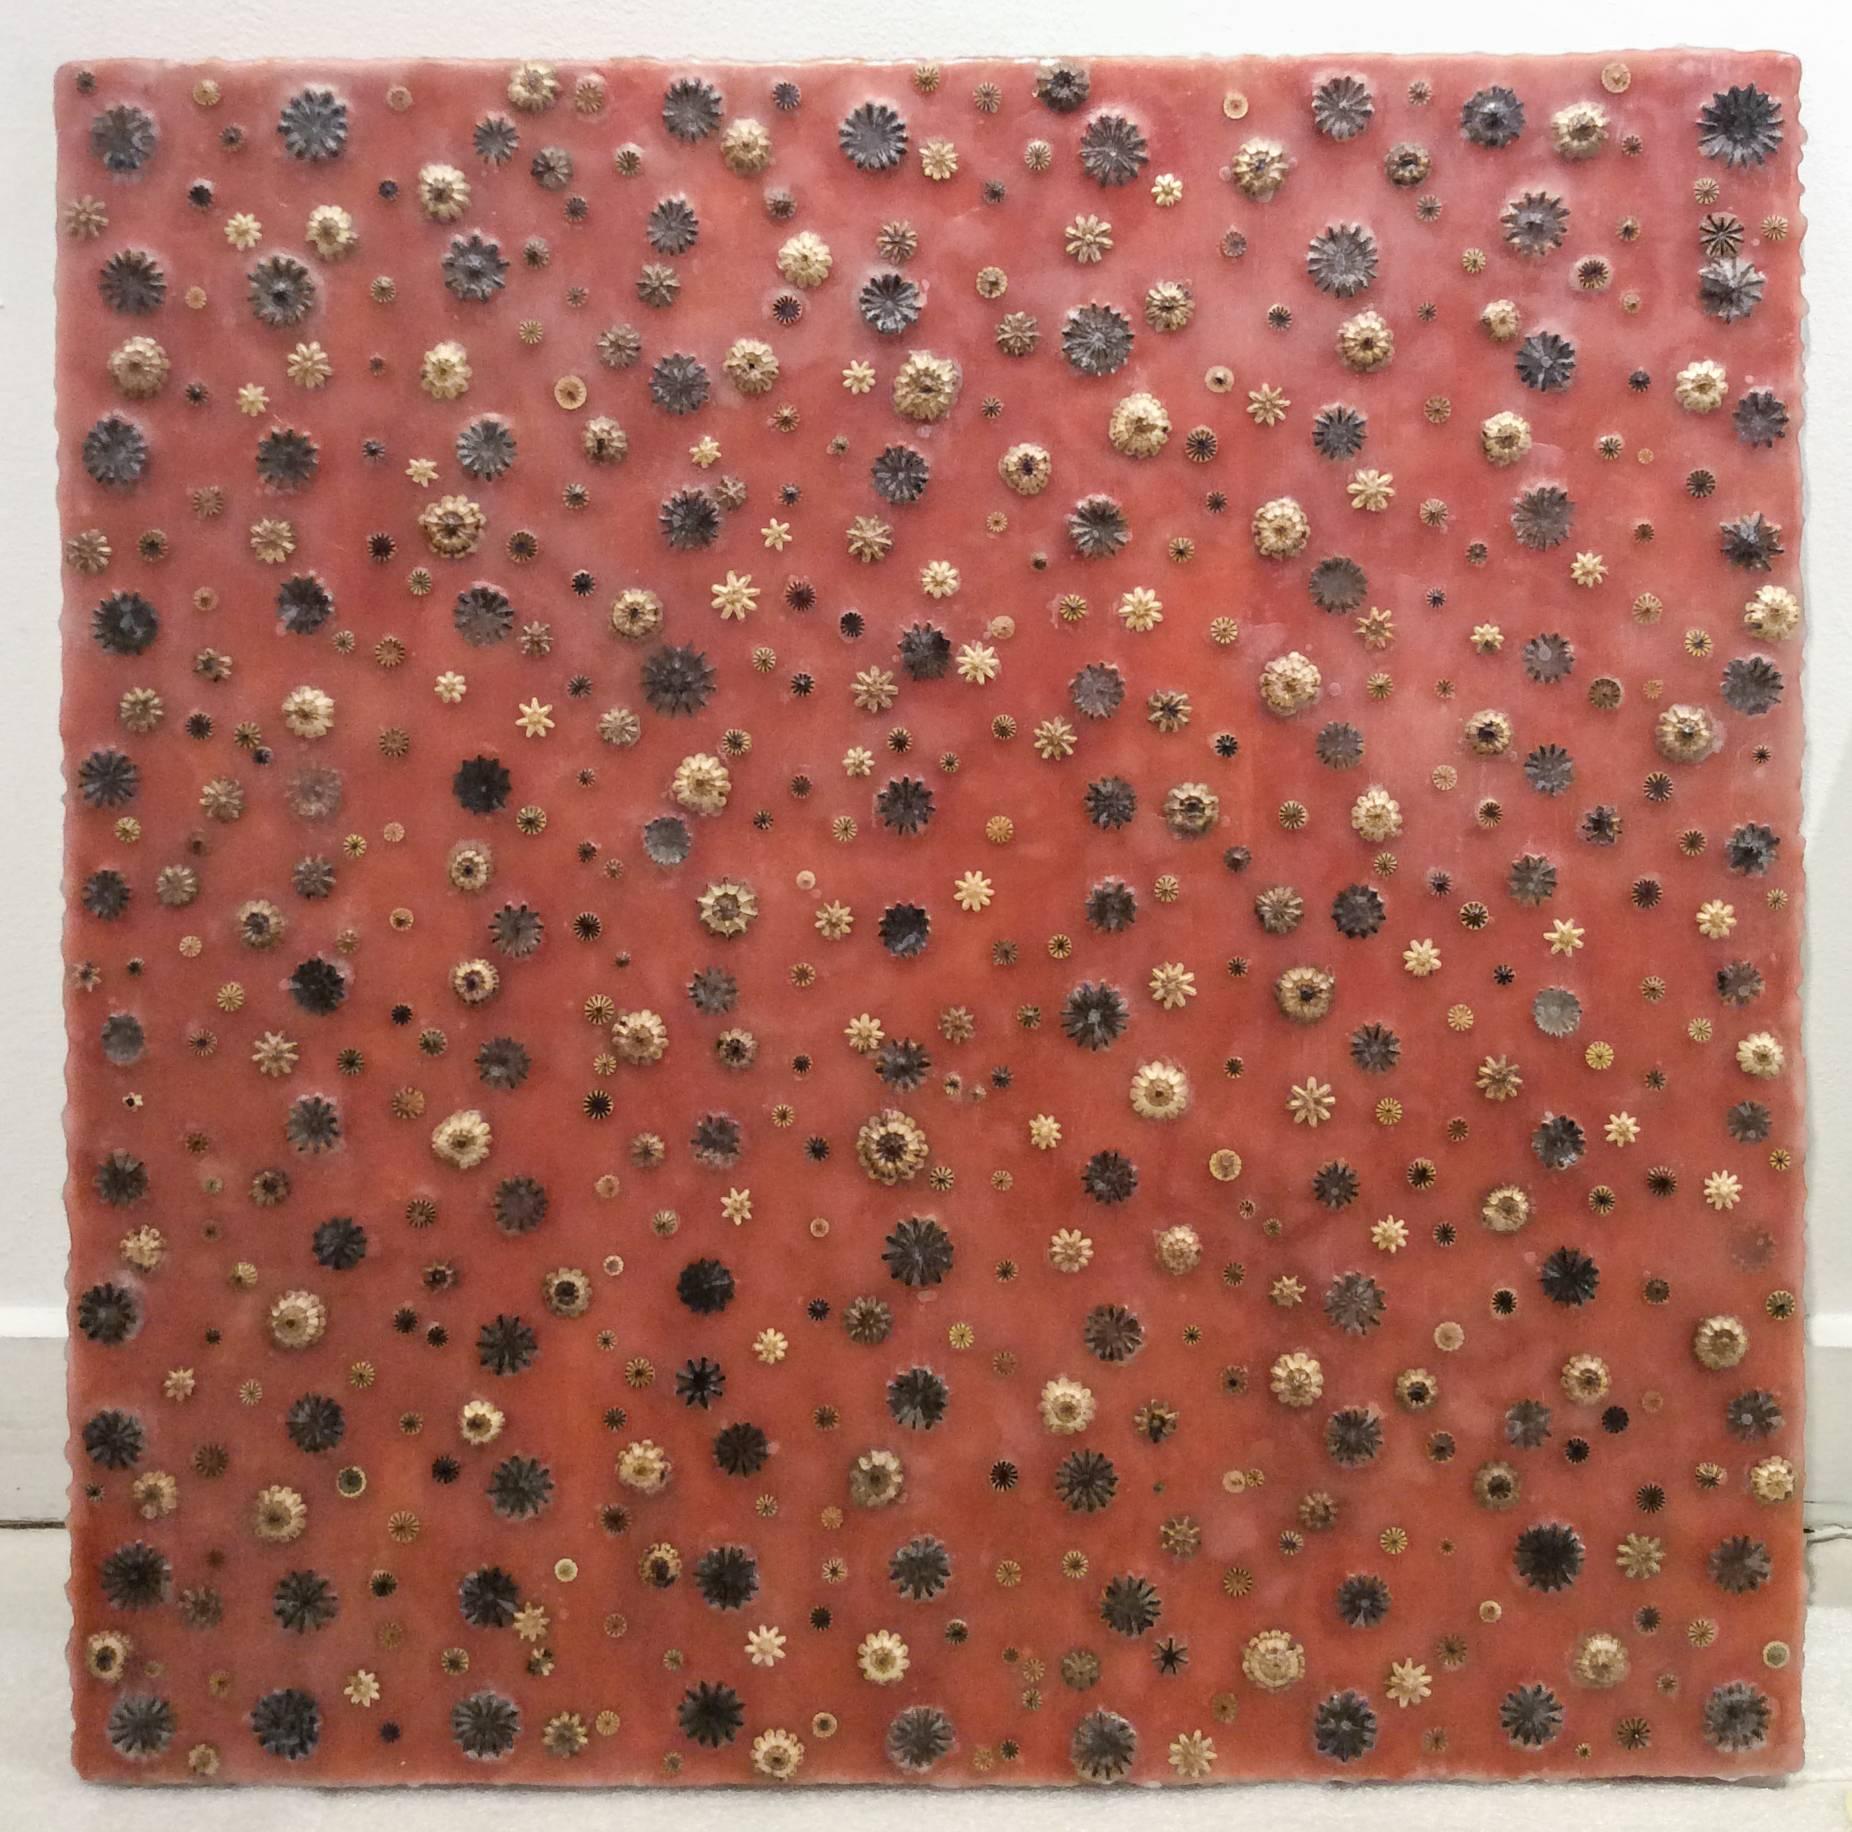 Poppying In & Out (Abstract Encaustic Painting on Panel of Poppy Pods on Red)  - Brown Abstract Painting by Allyson Levy